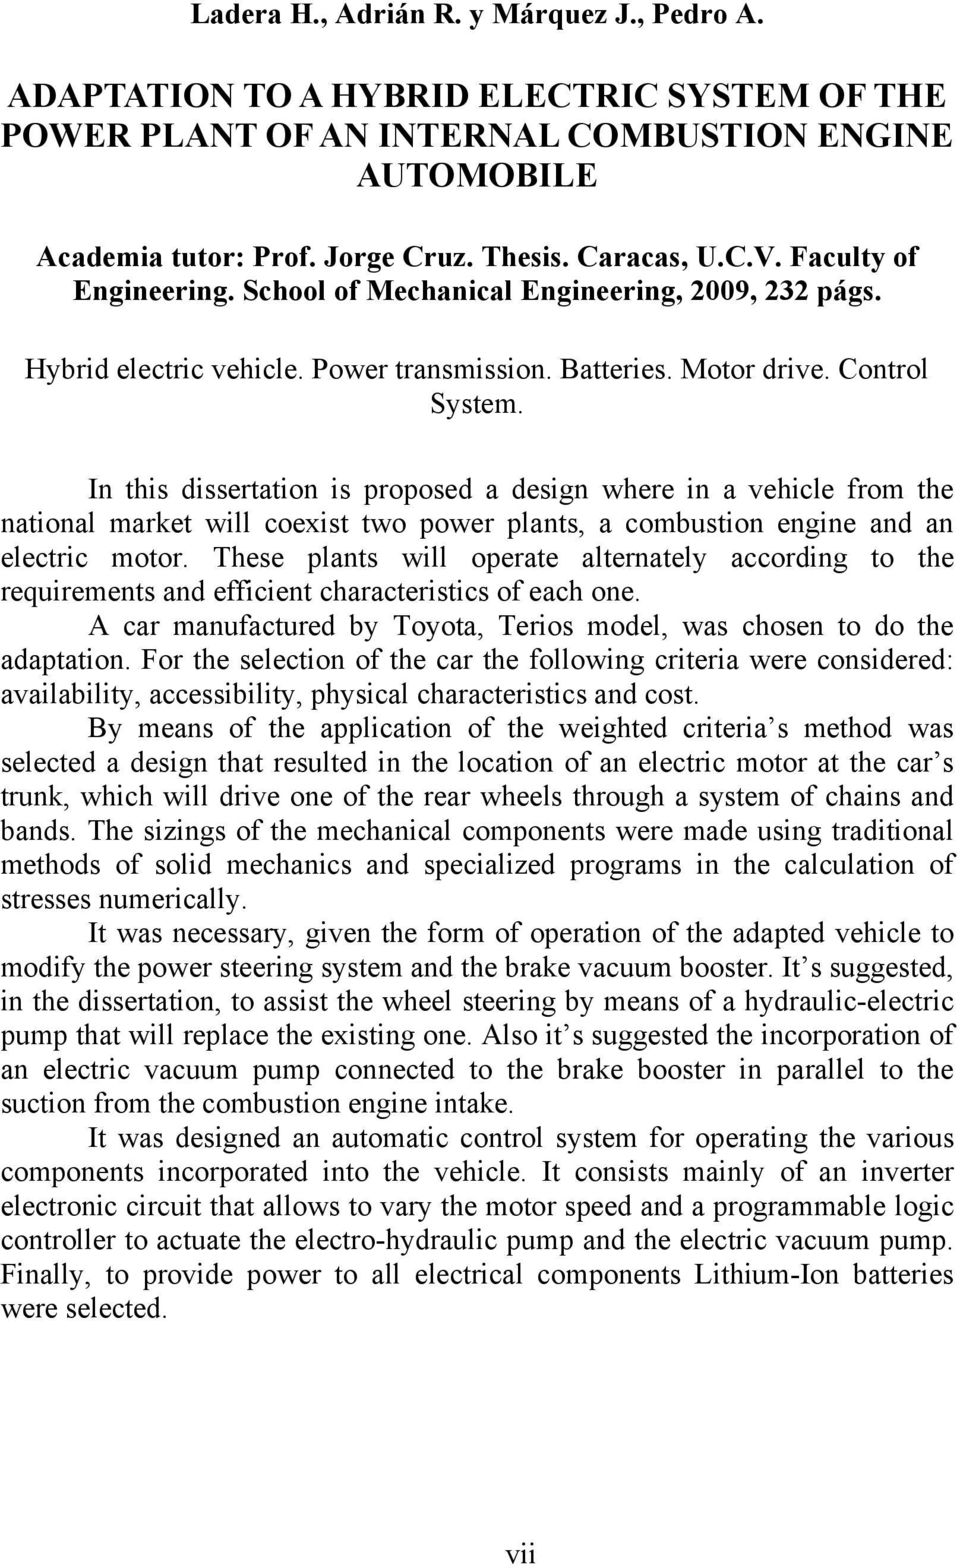 In this dissertation is proposed a design where in a vehicle from the national market will coexist two power plants, a combustion engine and an electric motor.